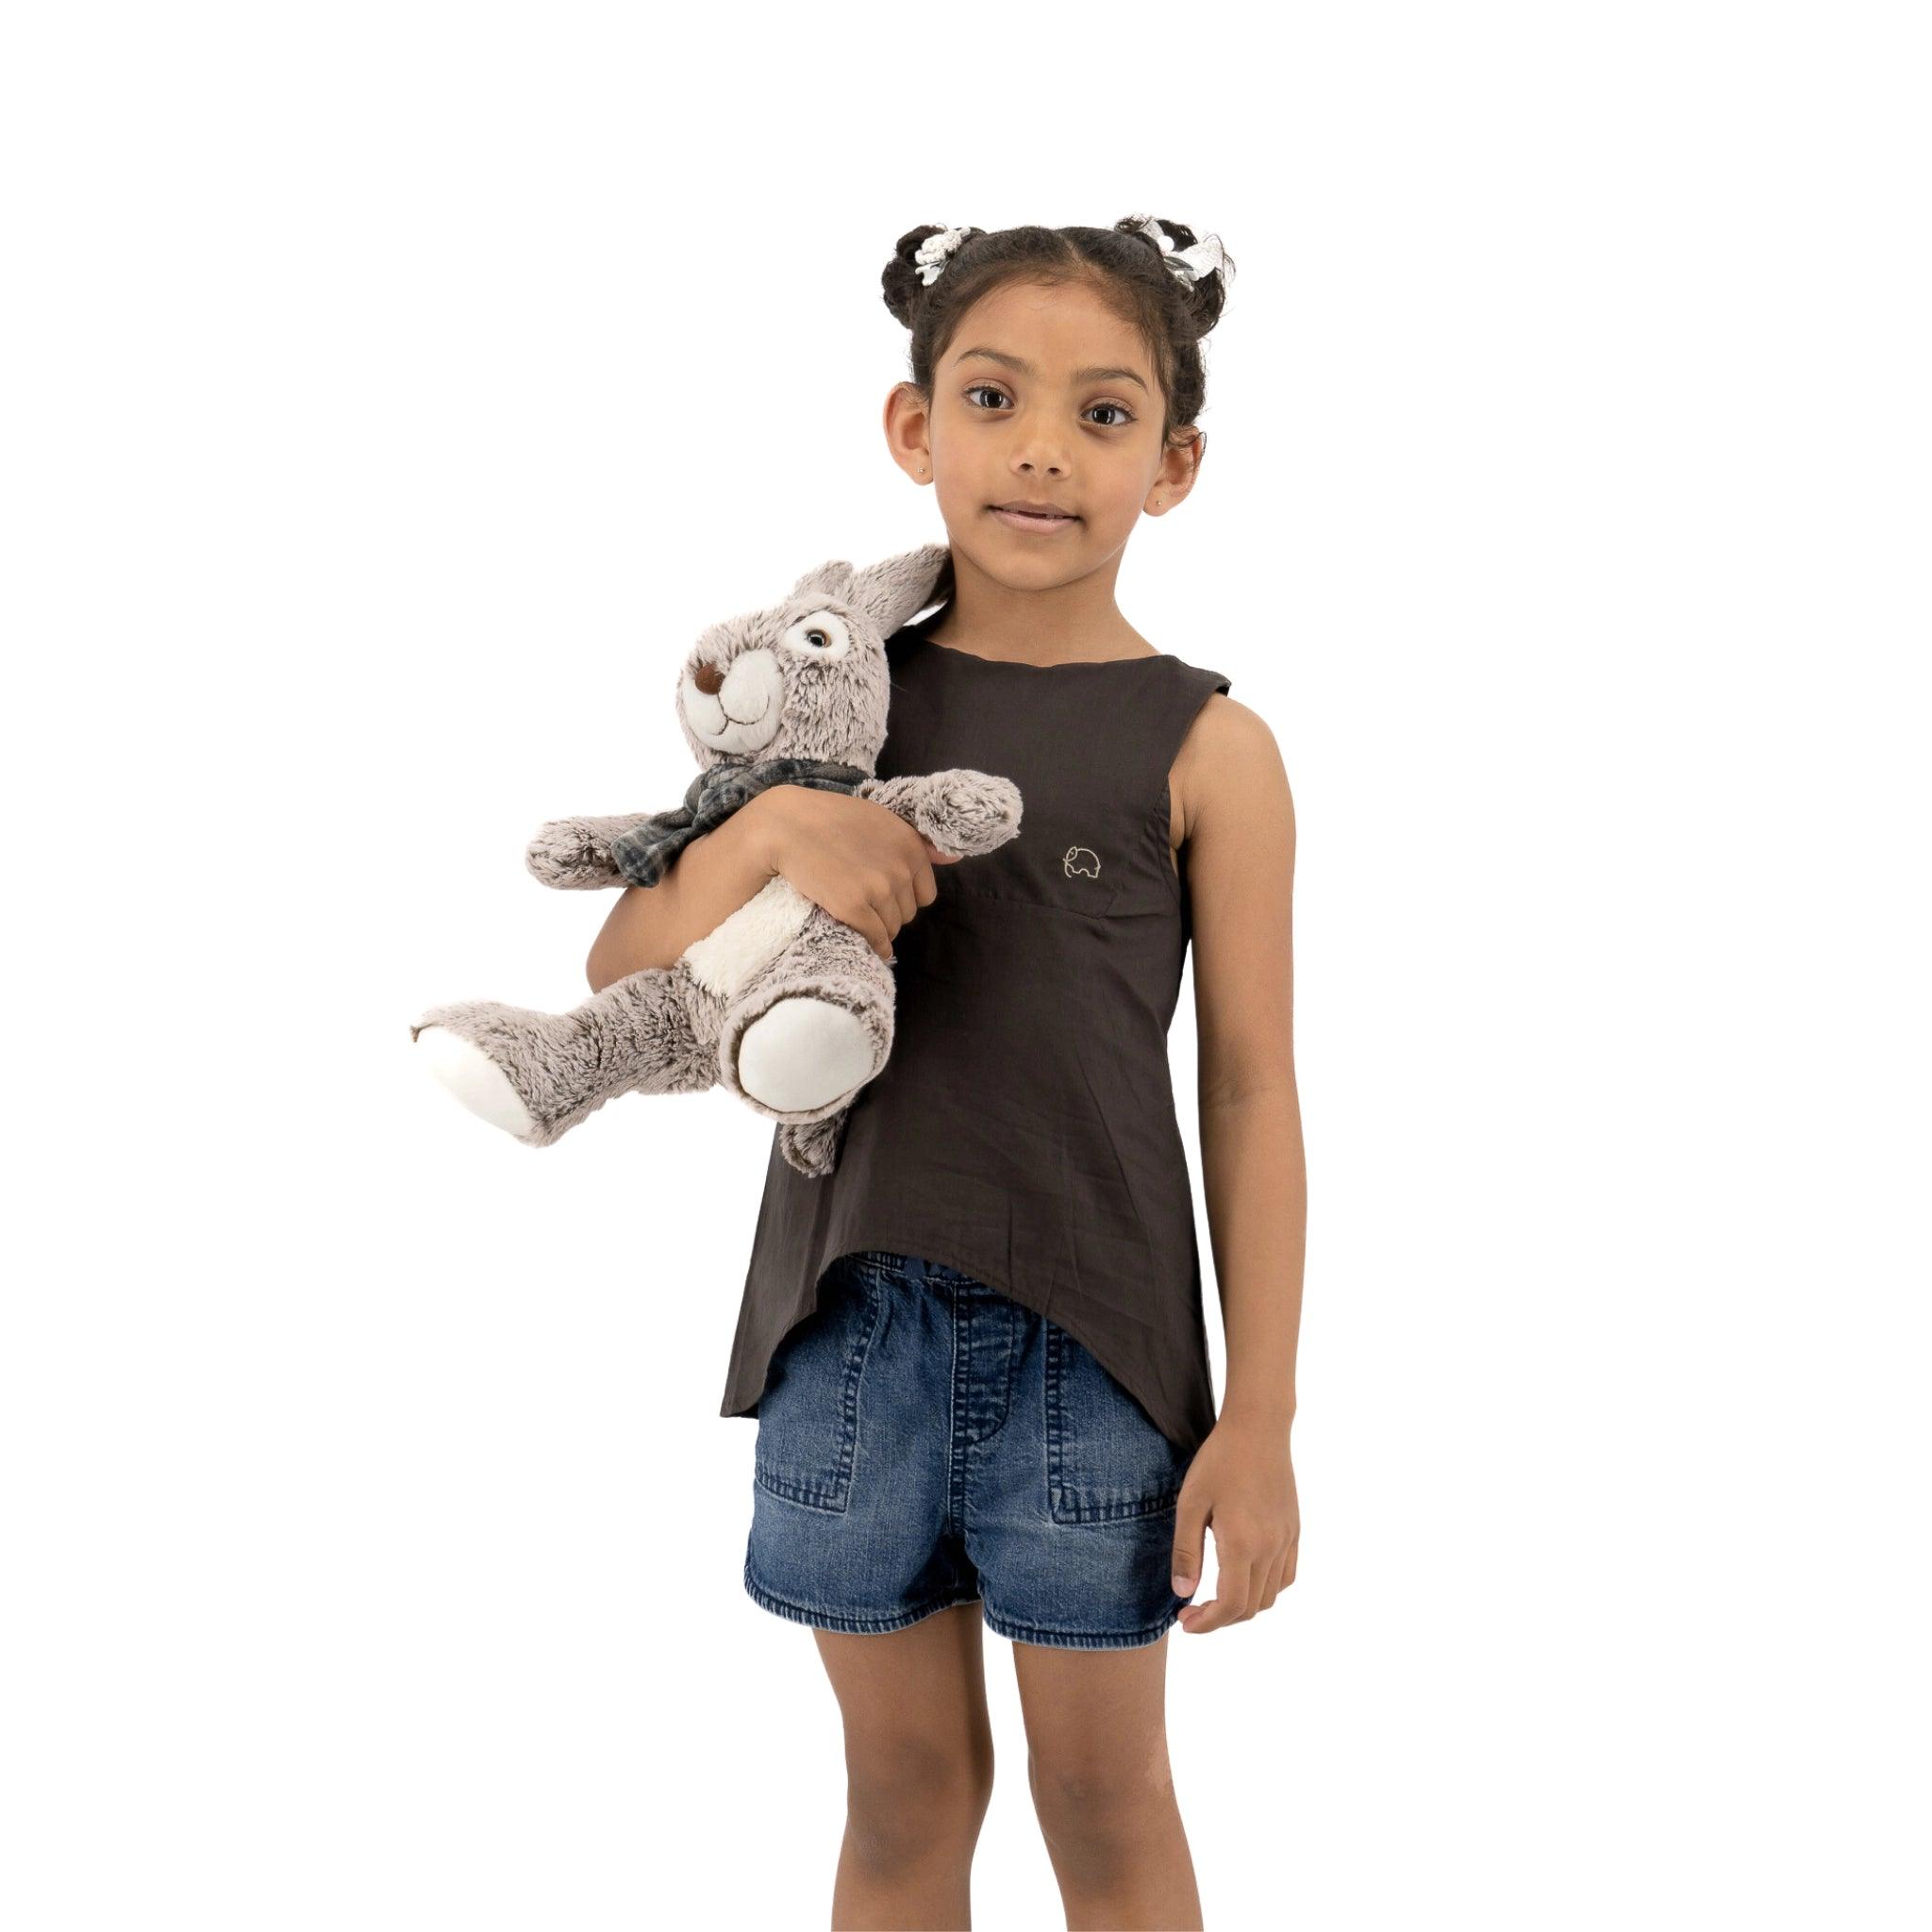 A young girl with pigtails holding a stuffed animal, wearing a Plum Kitten Cotton Bib Neck Top for Kids by Karee and denim shorts, standing against a white background.